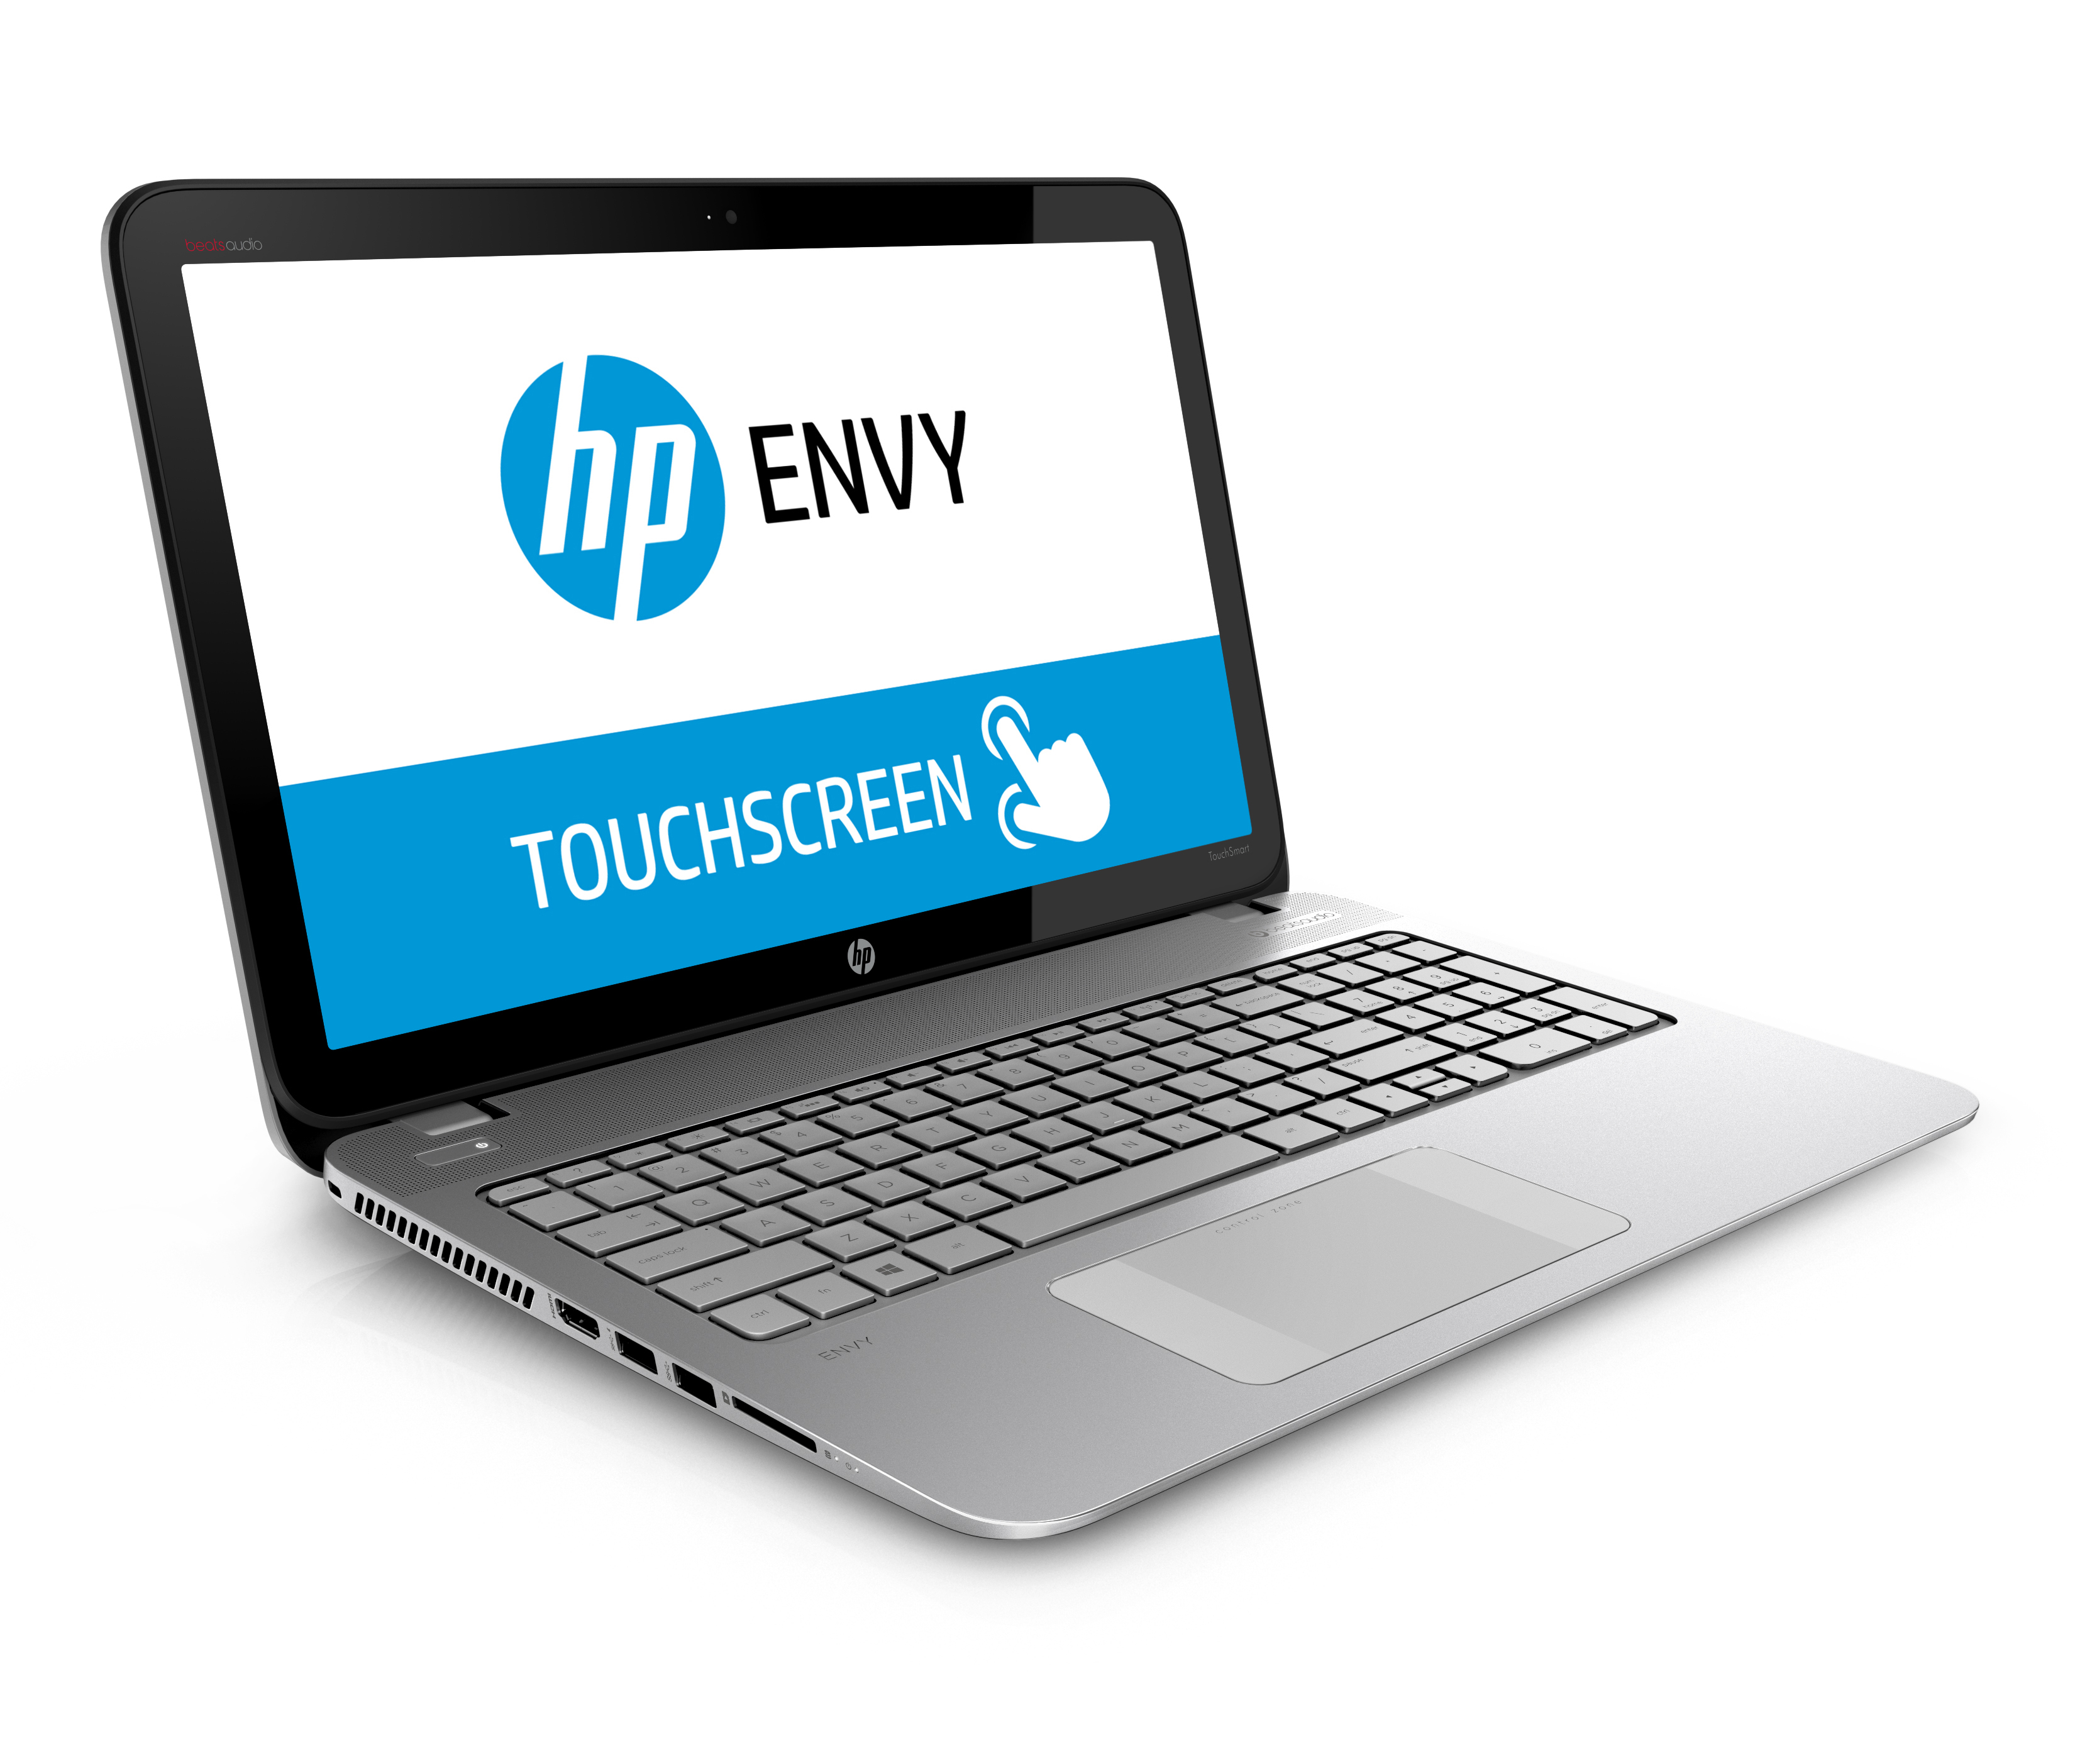 ENVY 15-q200 Notebook PC (Touch)